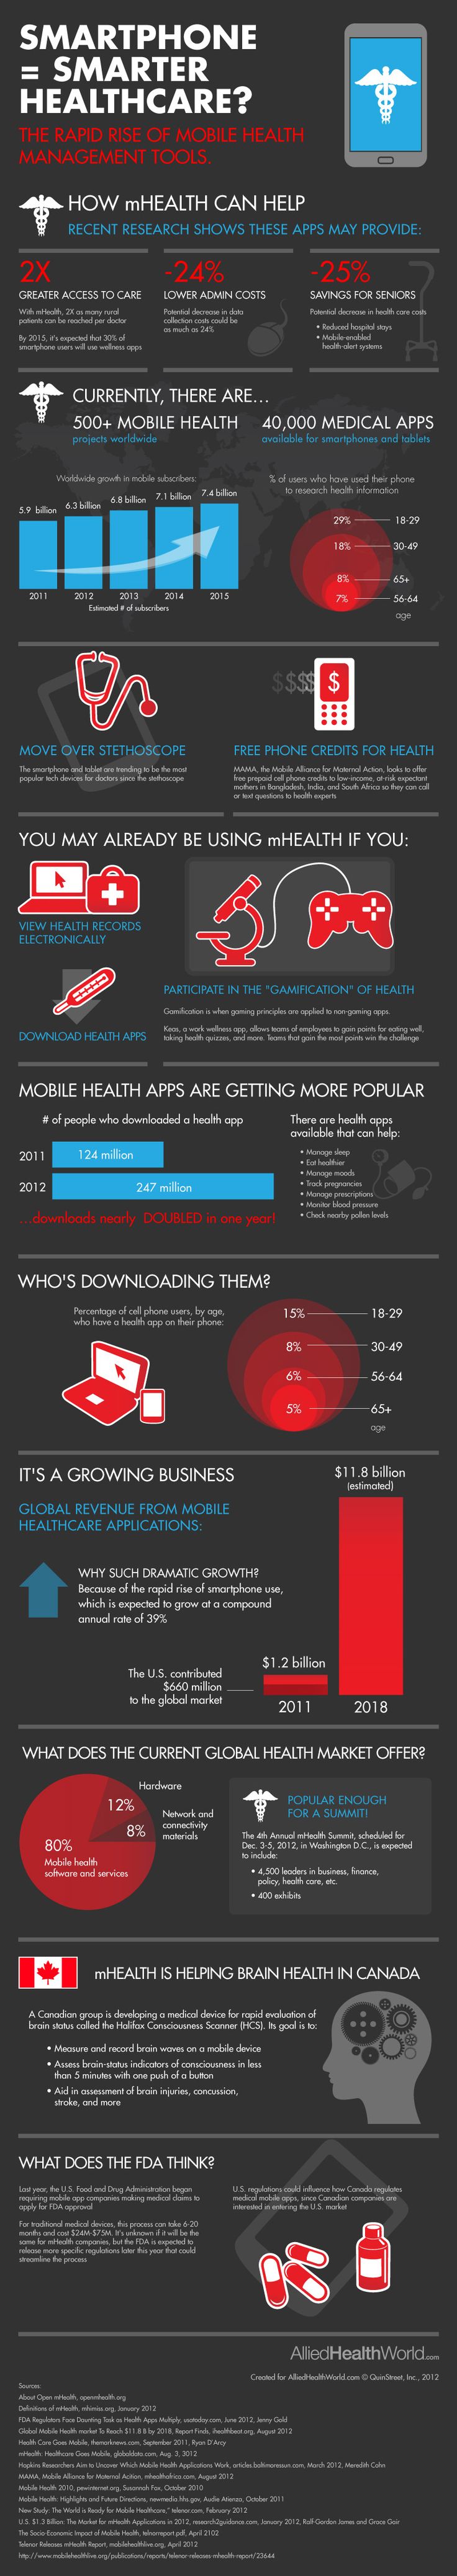 The Future of Healthcare Mobile Health Apps and Digital Health Revolution